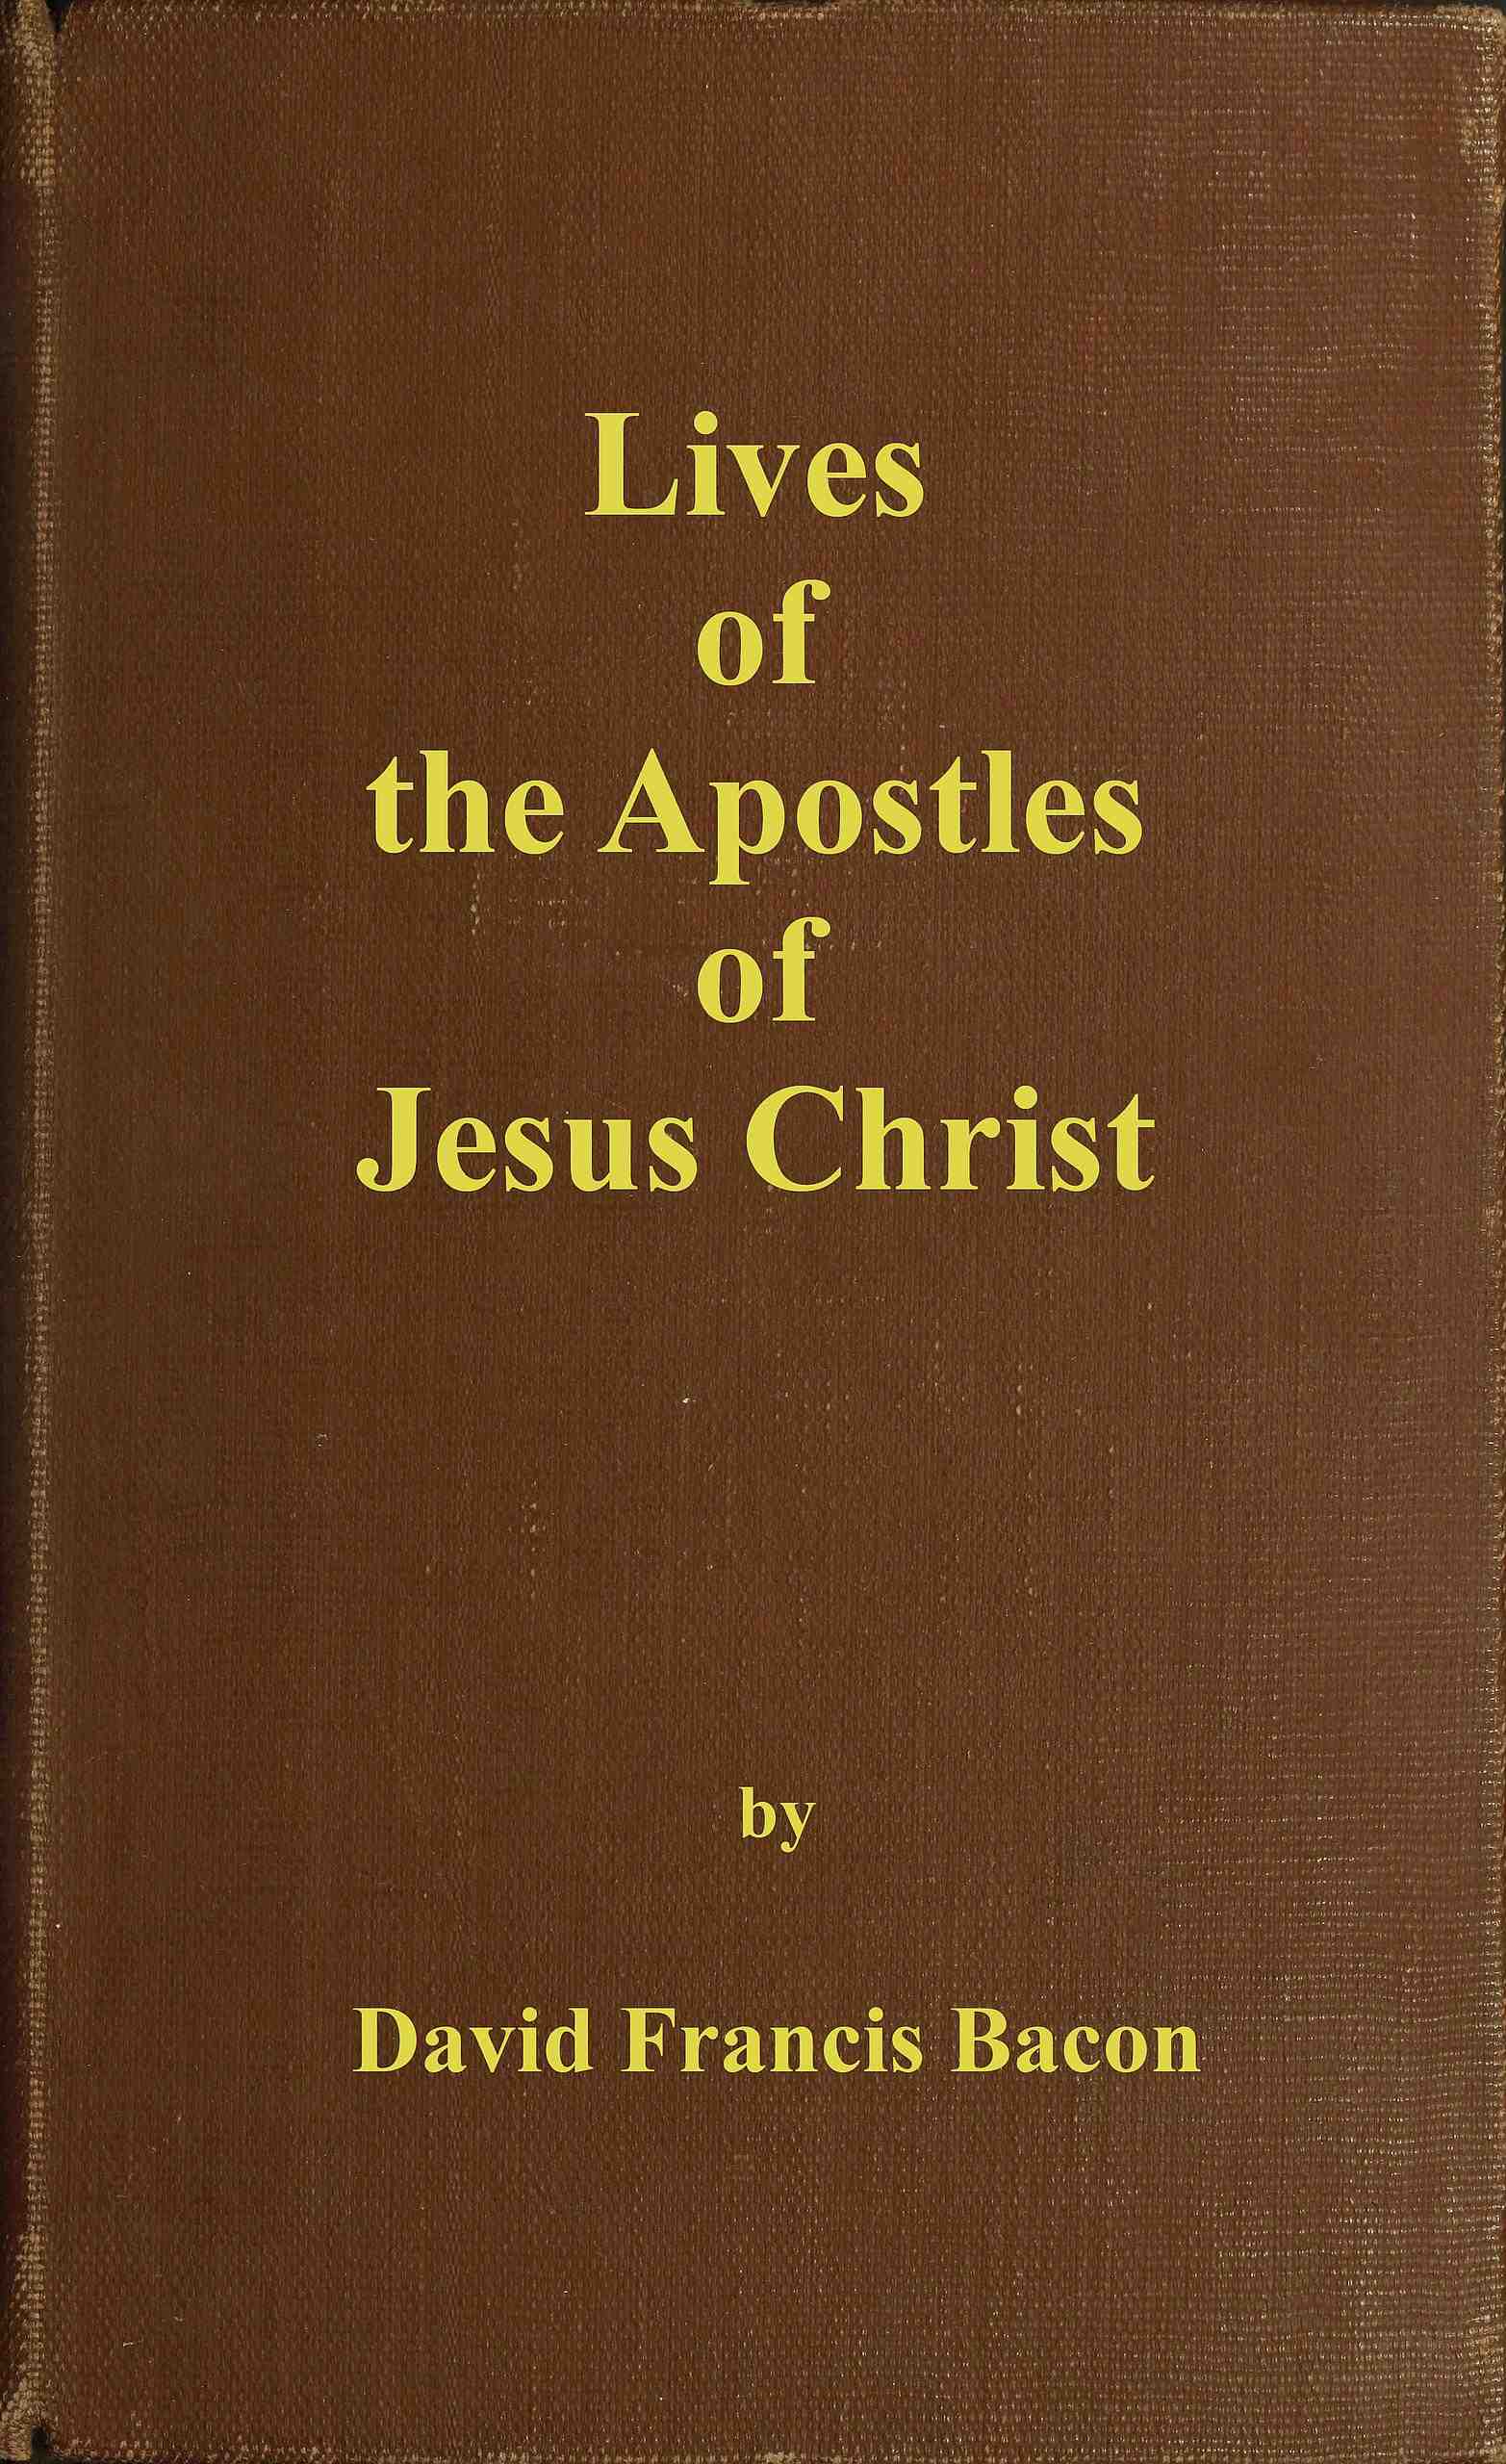 Lives of the apostles of Jesus Christ